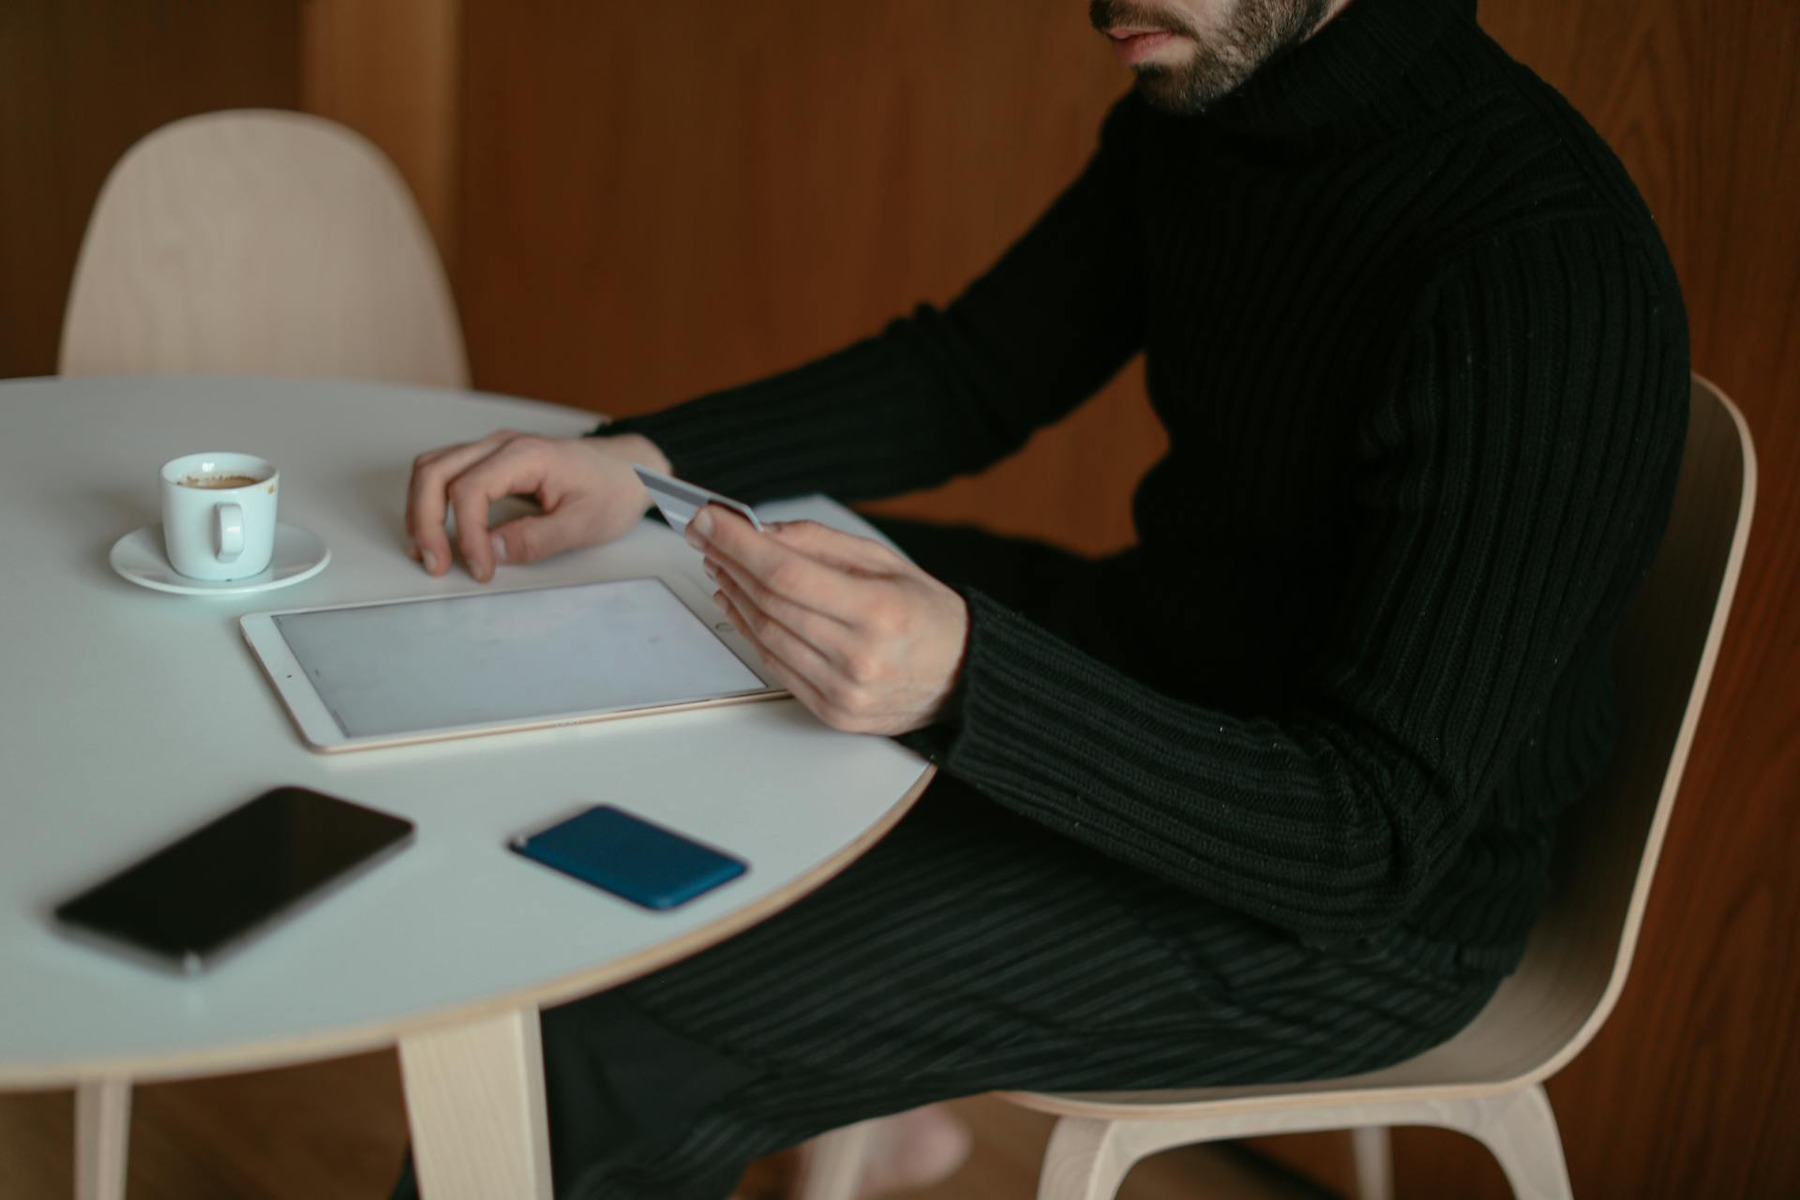 A man in a sweater sitting at a table, using a tablet and enjoying a cup of coffee